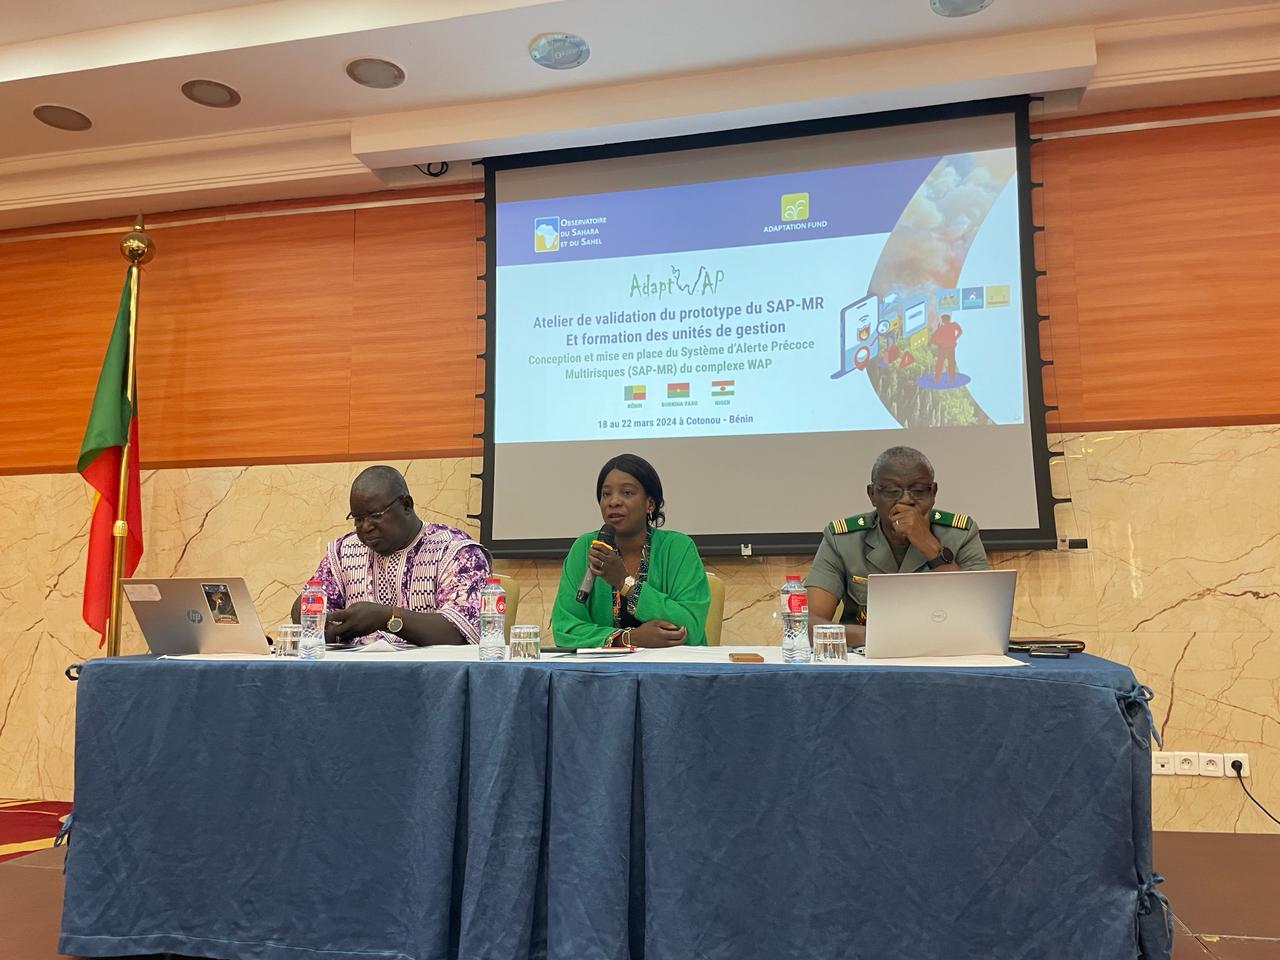  Regional Workshop for Validation of the Prototype of the Multi-Risk Early Warning System (SAP-MR) and Capacity Building Session for Management Units, March, 18-23, Cotonou